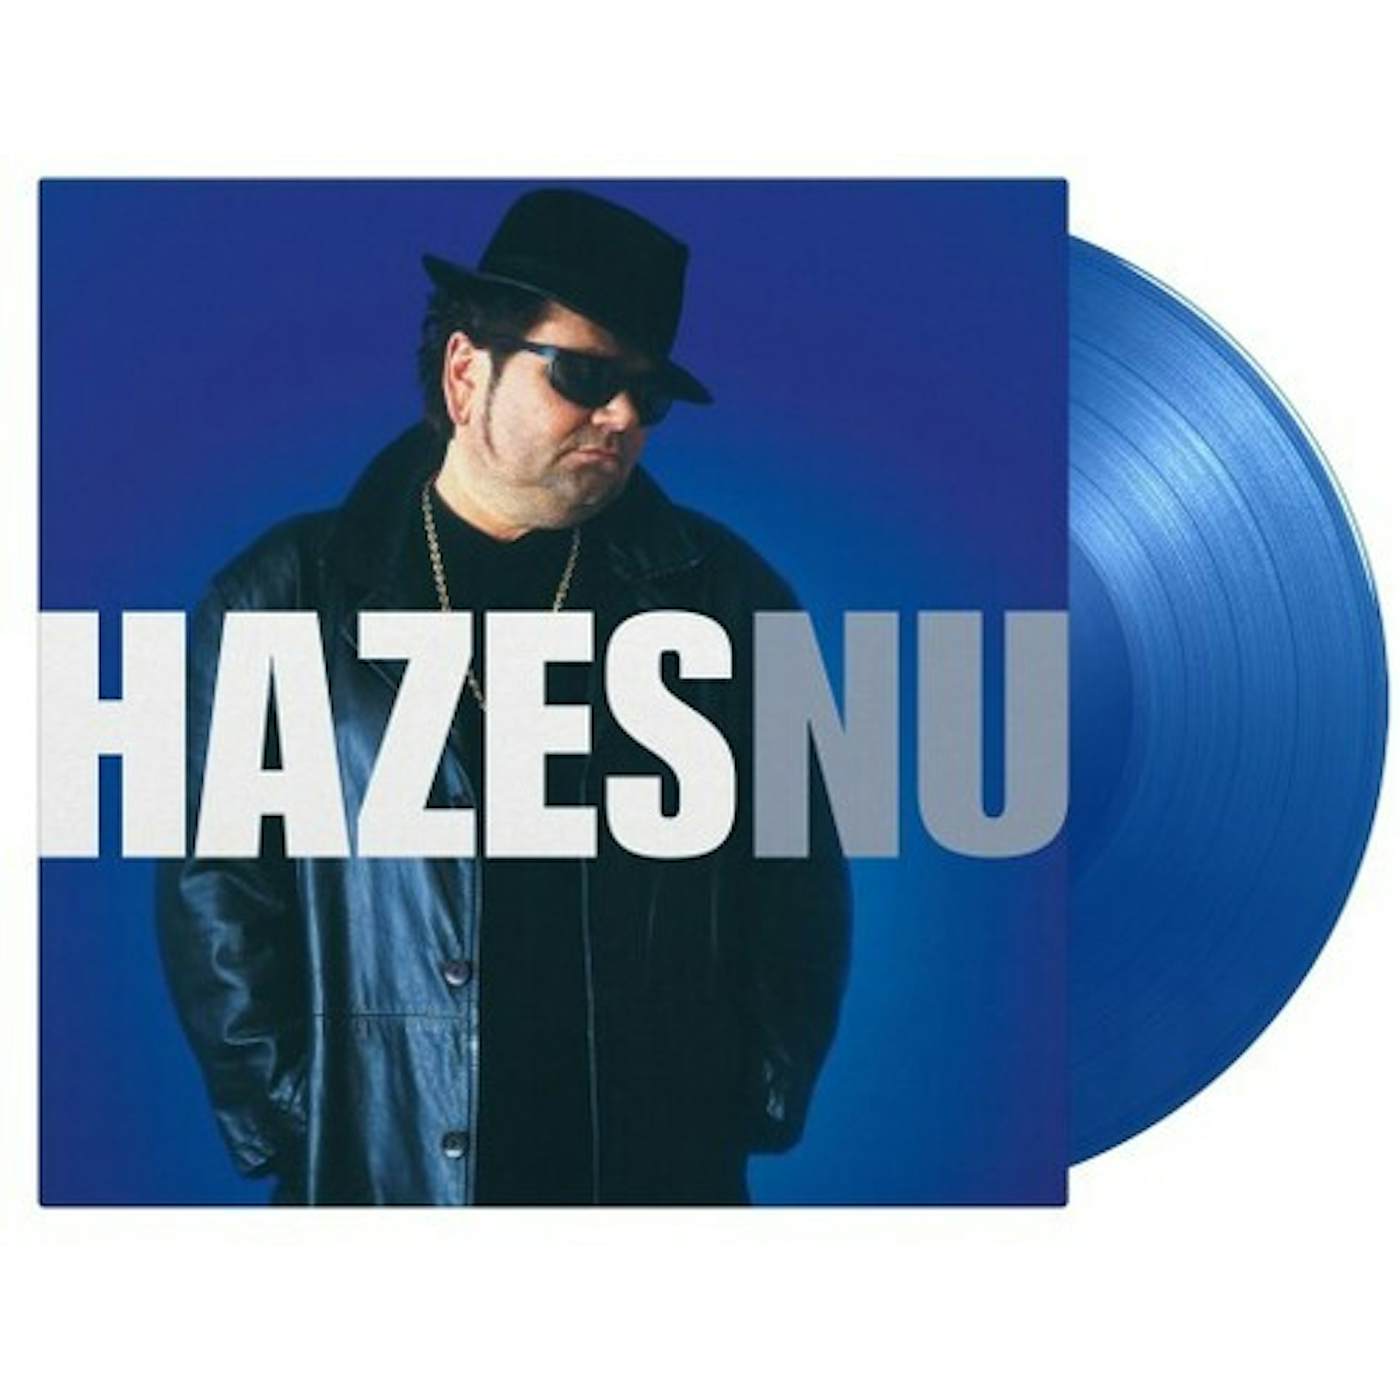 Andre Hazes Nu (Limited Blue) Vinyl Record